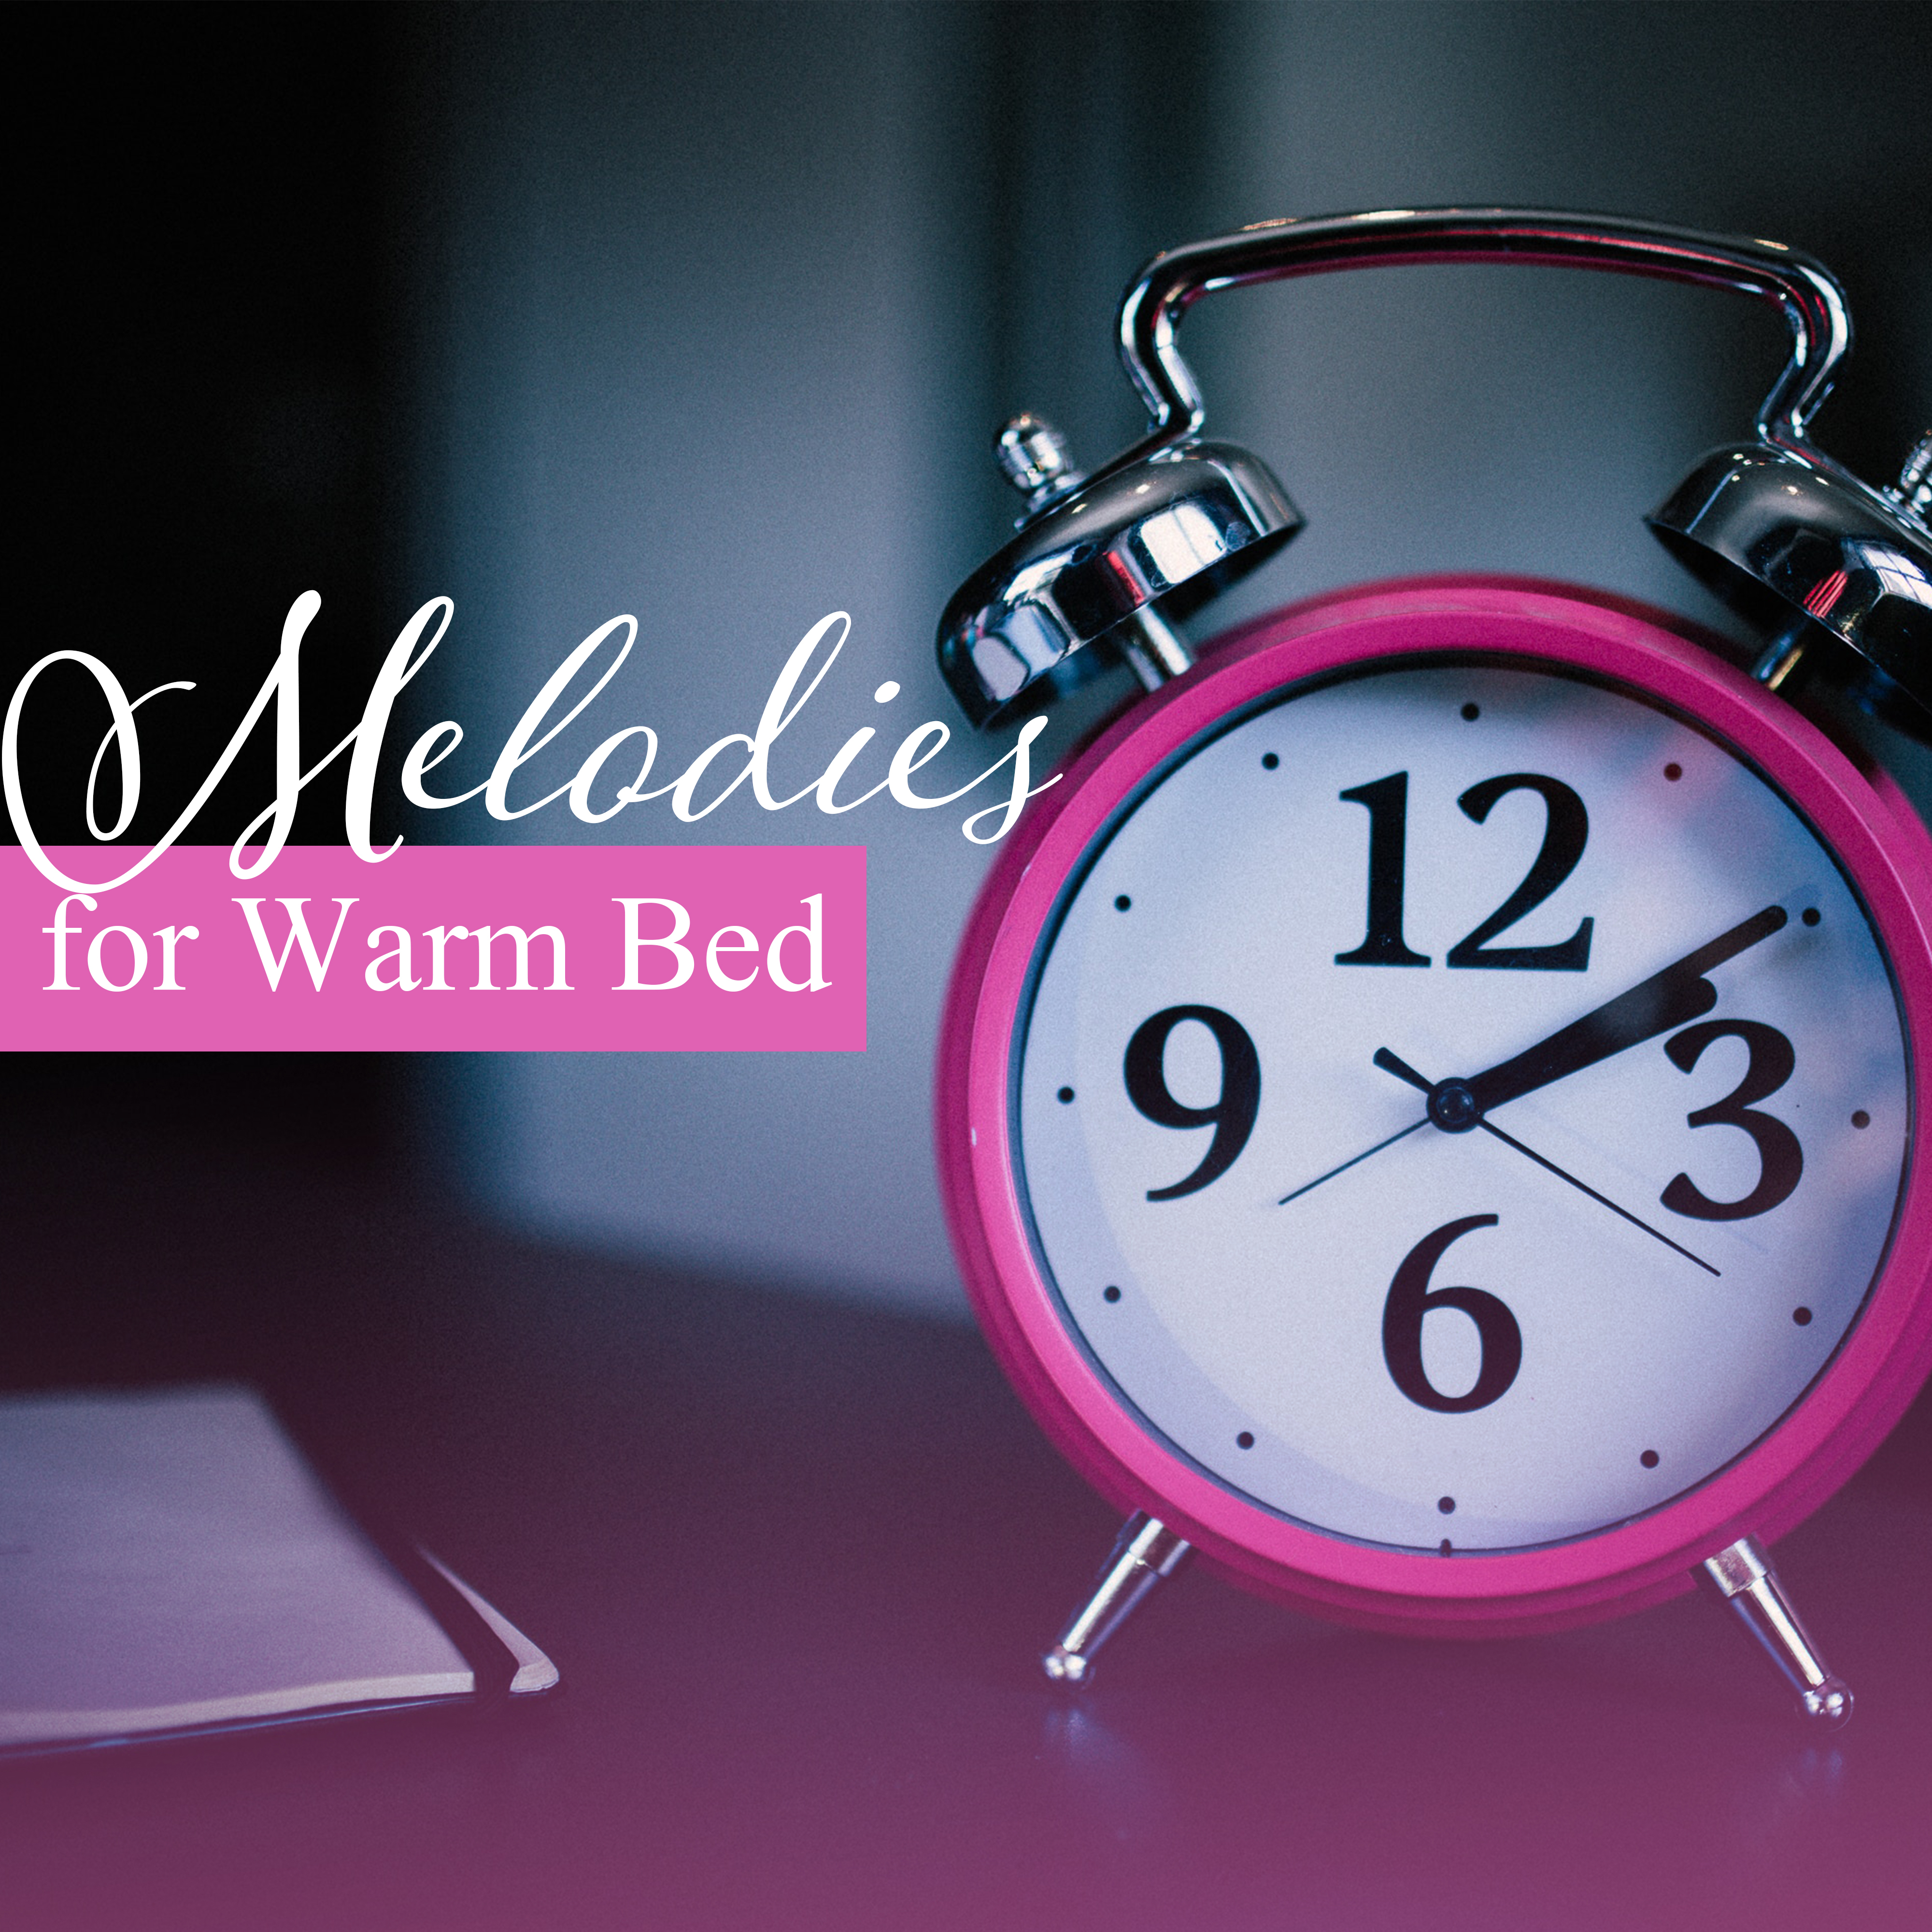 Melodies for Warm Bed – Lullabies, Soft Music at Goodnight, Naptime, Restful Sleep, Pure Mind